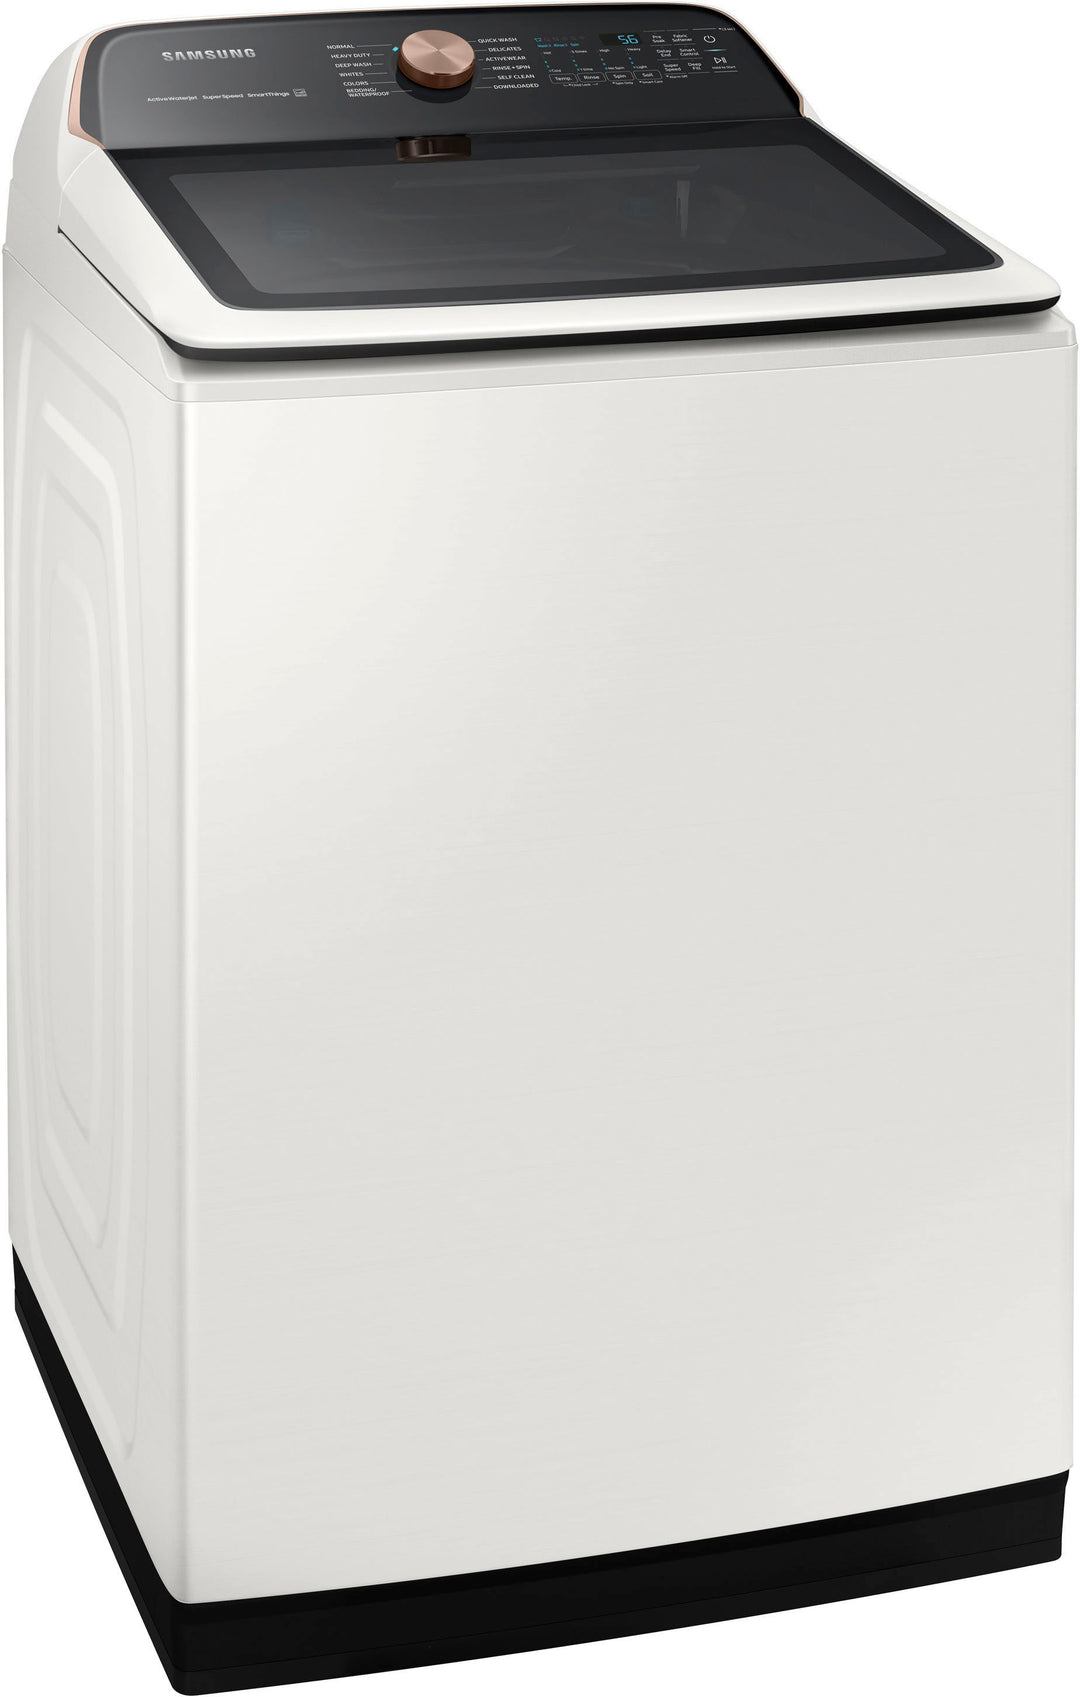 Samsung - 5.5 cu. ft. Extra-Large Capacity Smart Top Load Washer with Super Speed Wash - Ivory_10